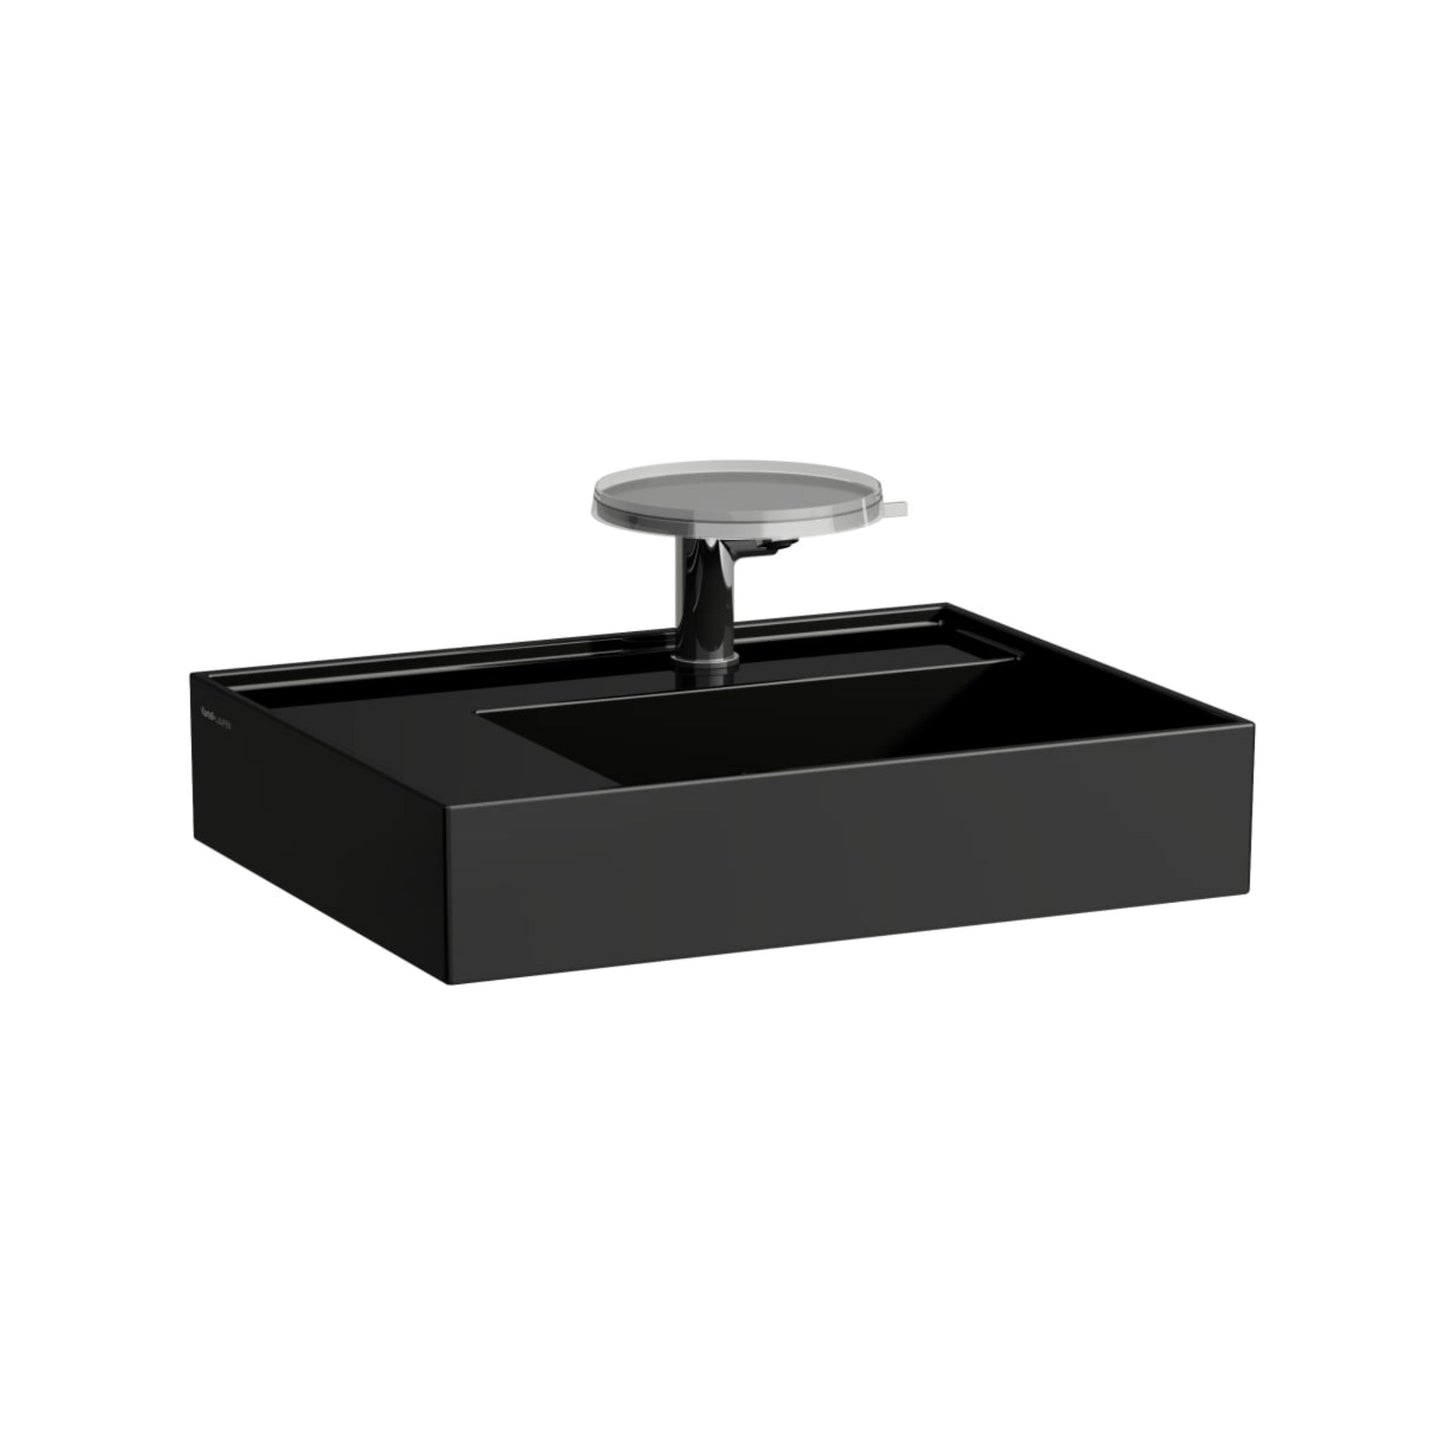 Laufen Kartell 24" x 18" Glossy Black Countertop Shelf-Left Bathroom Sink With Faucet Hole